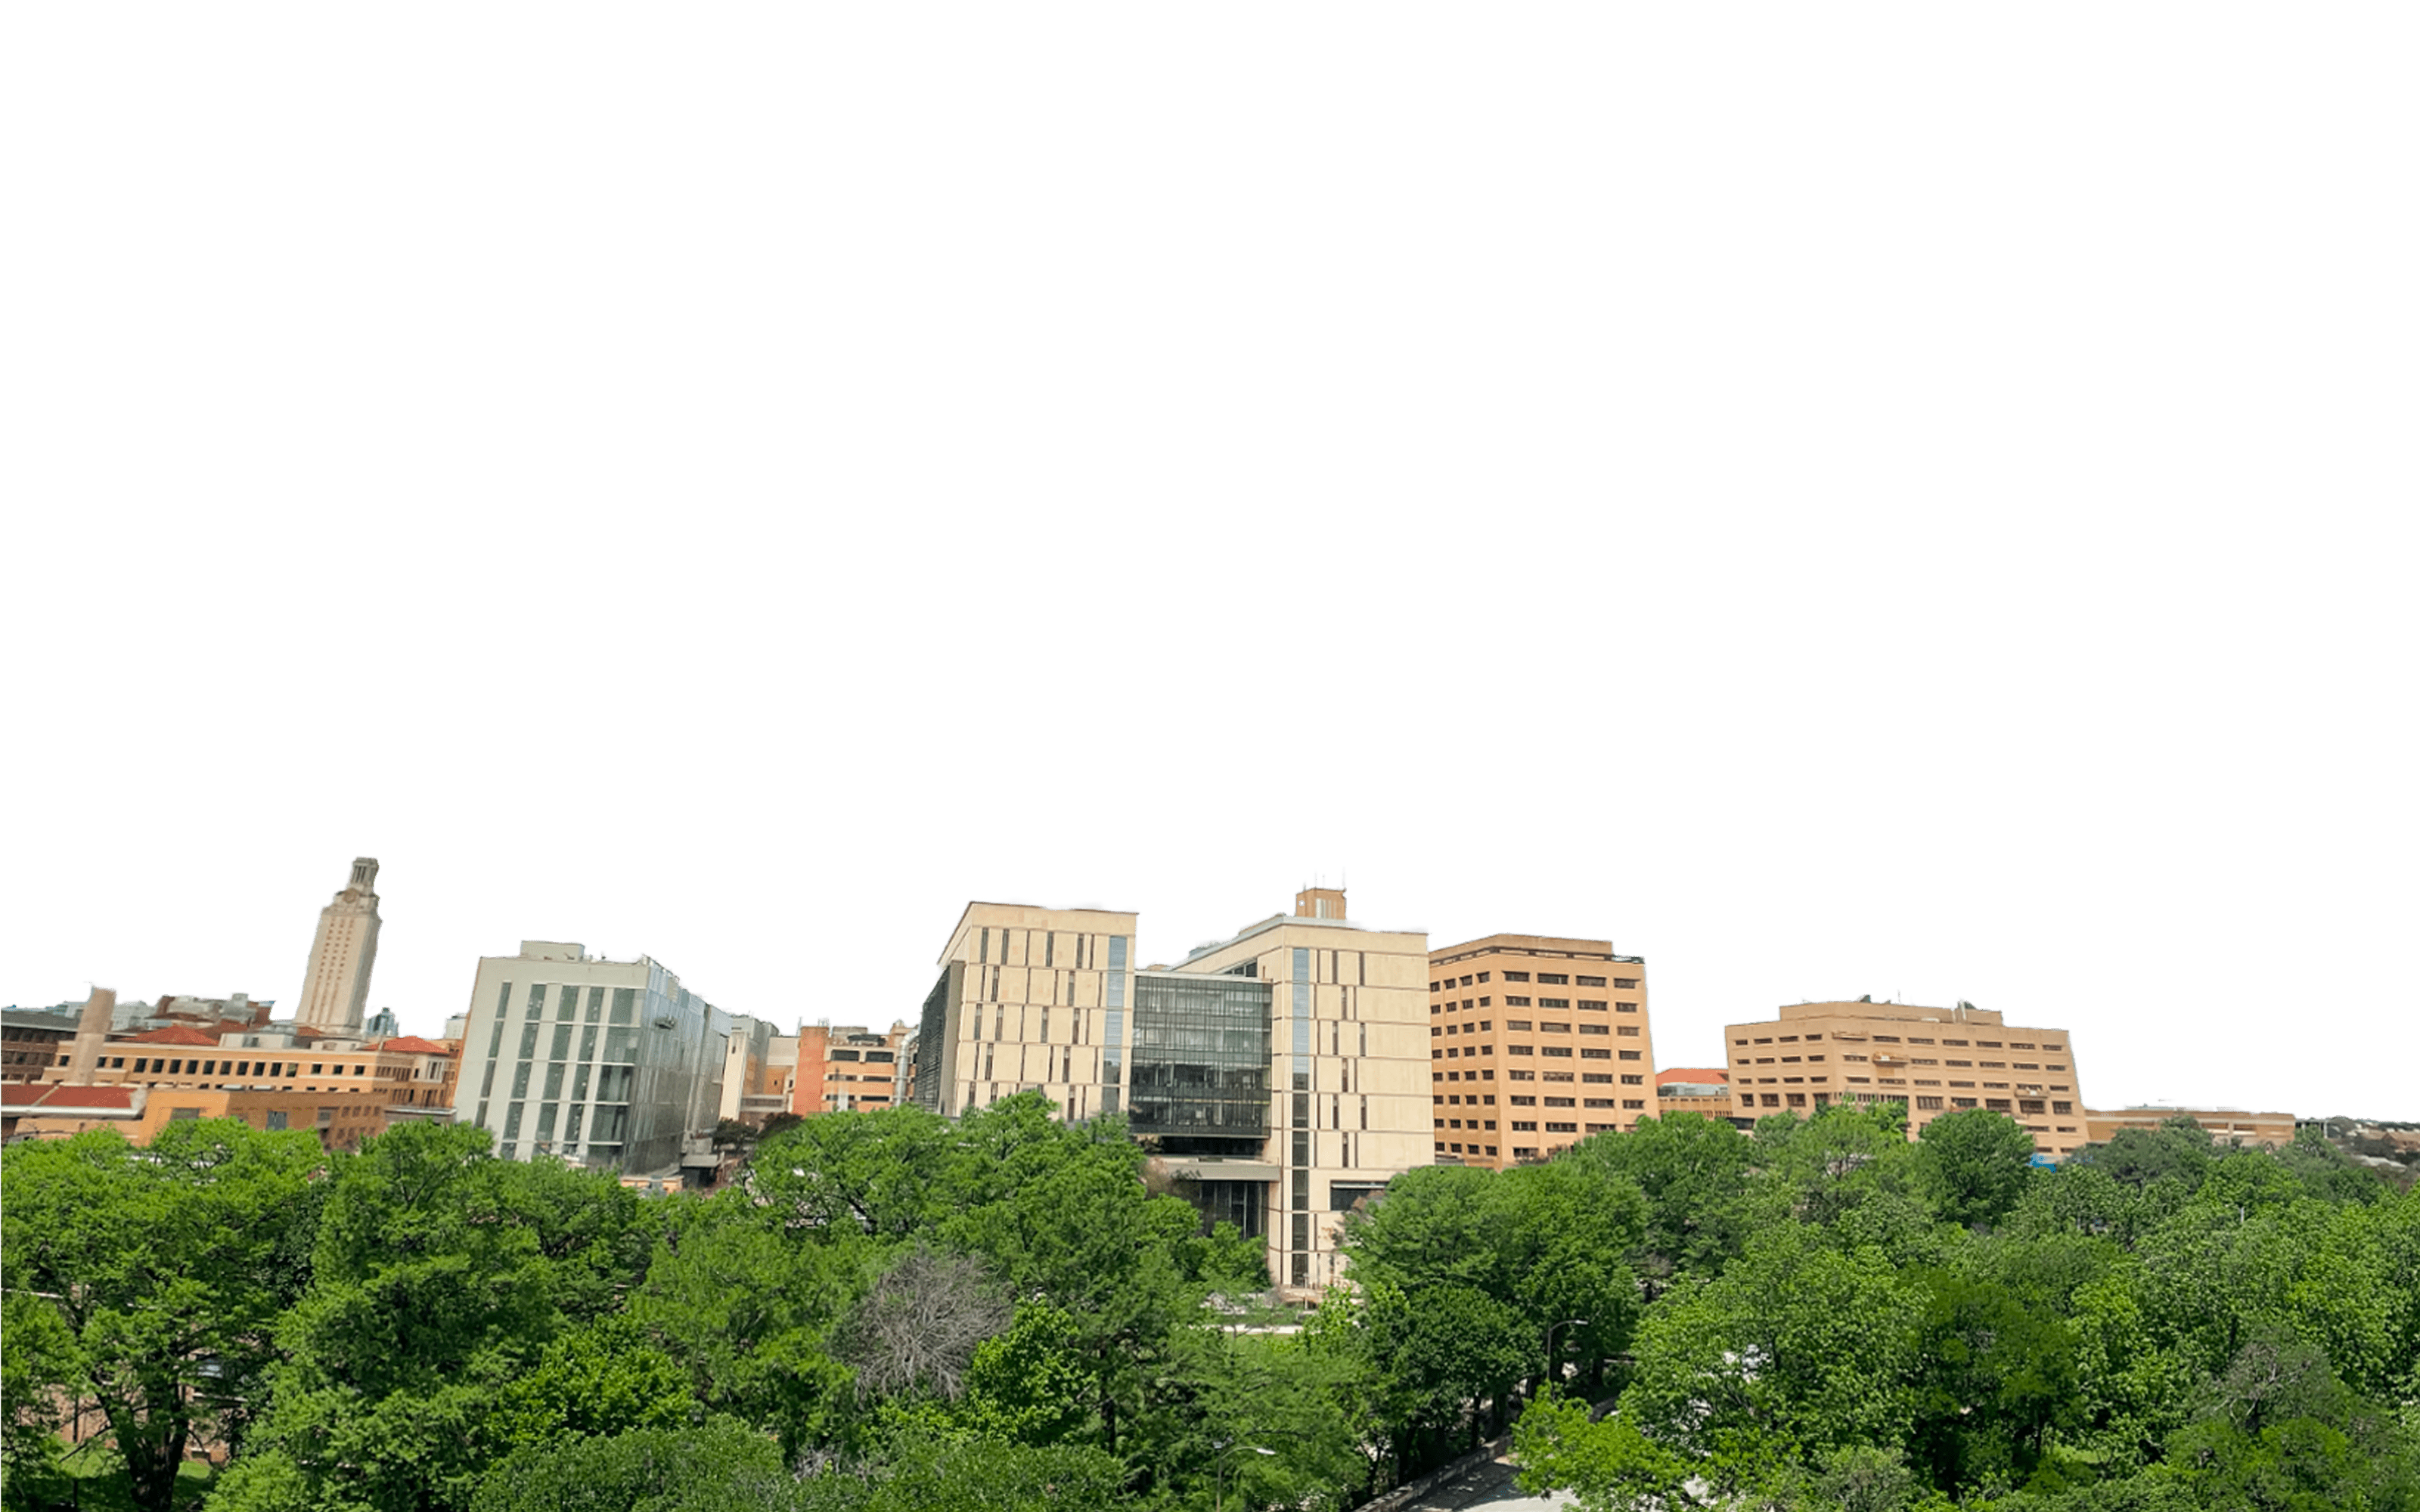 Cockrell School of Engineering buildings skyline with trees